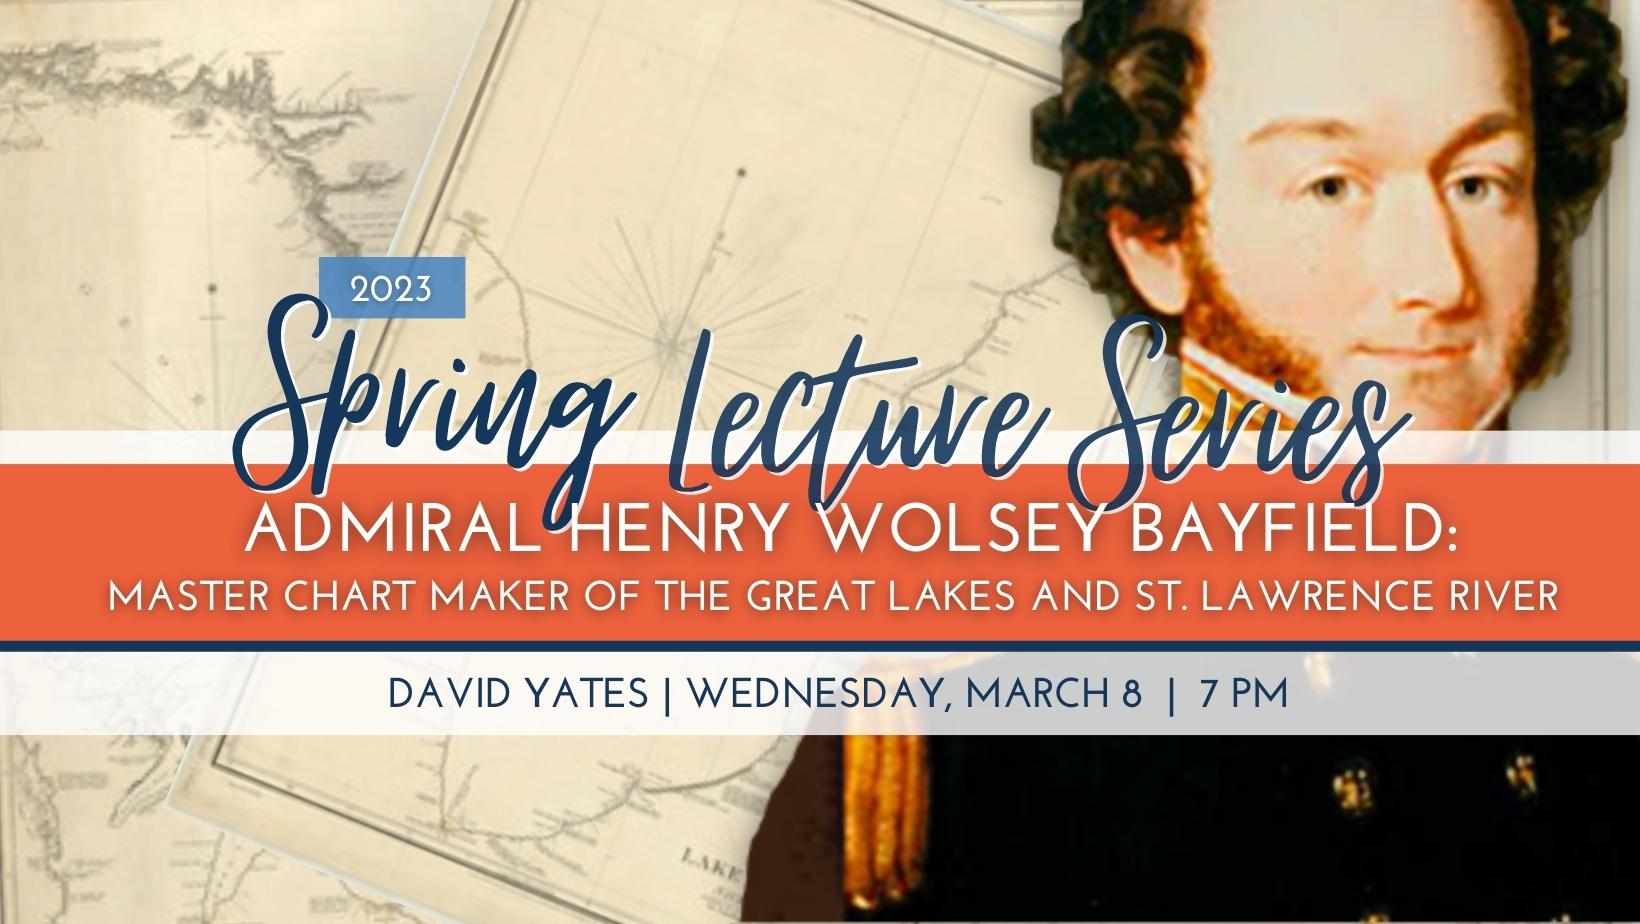 National Museum of the Great Lakes Kicks Off Spring Lecture Series